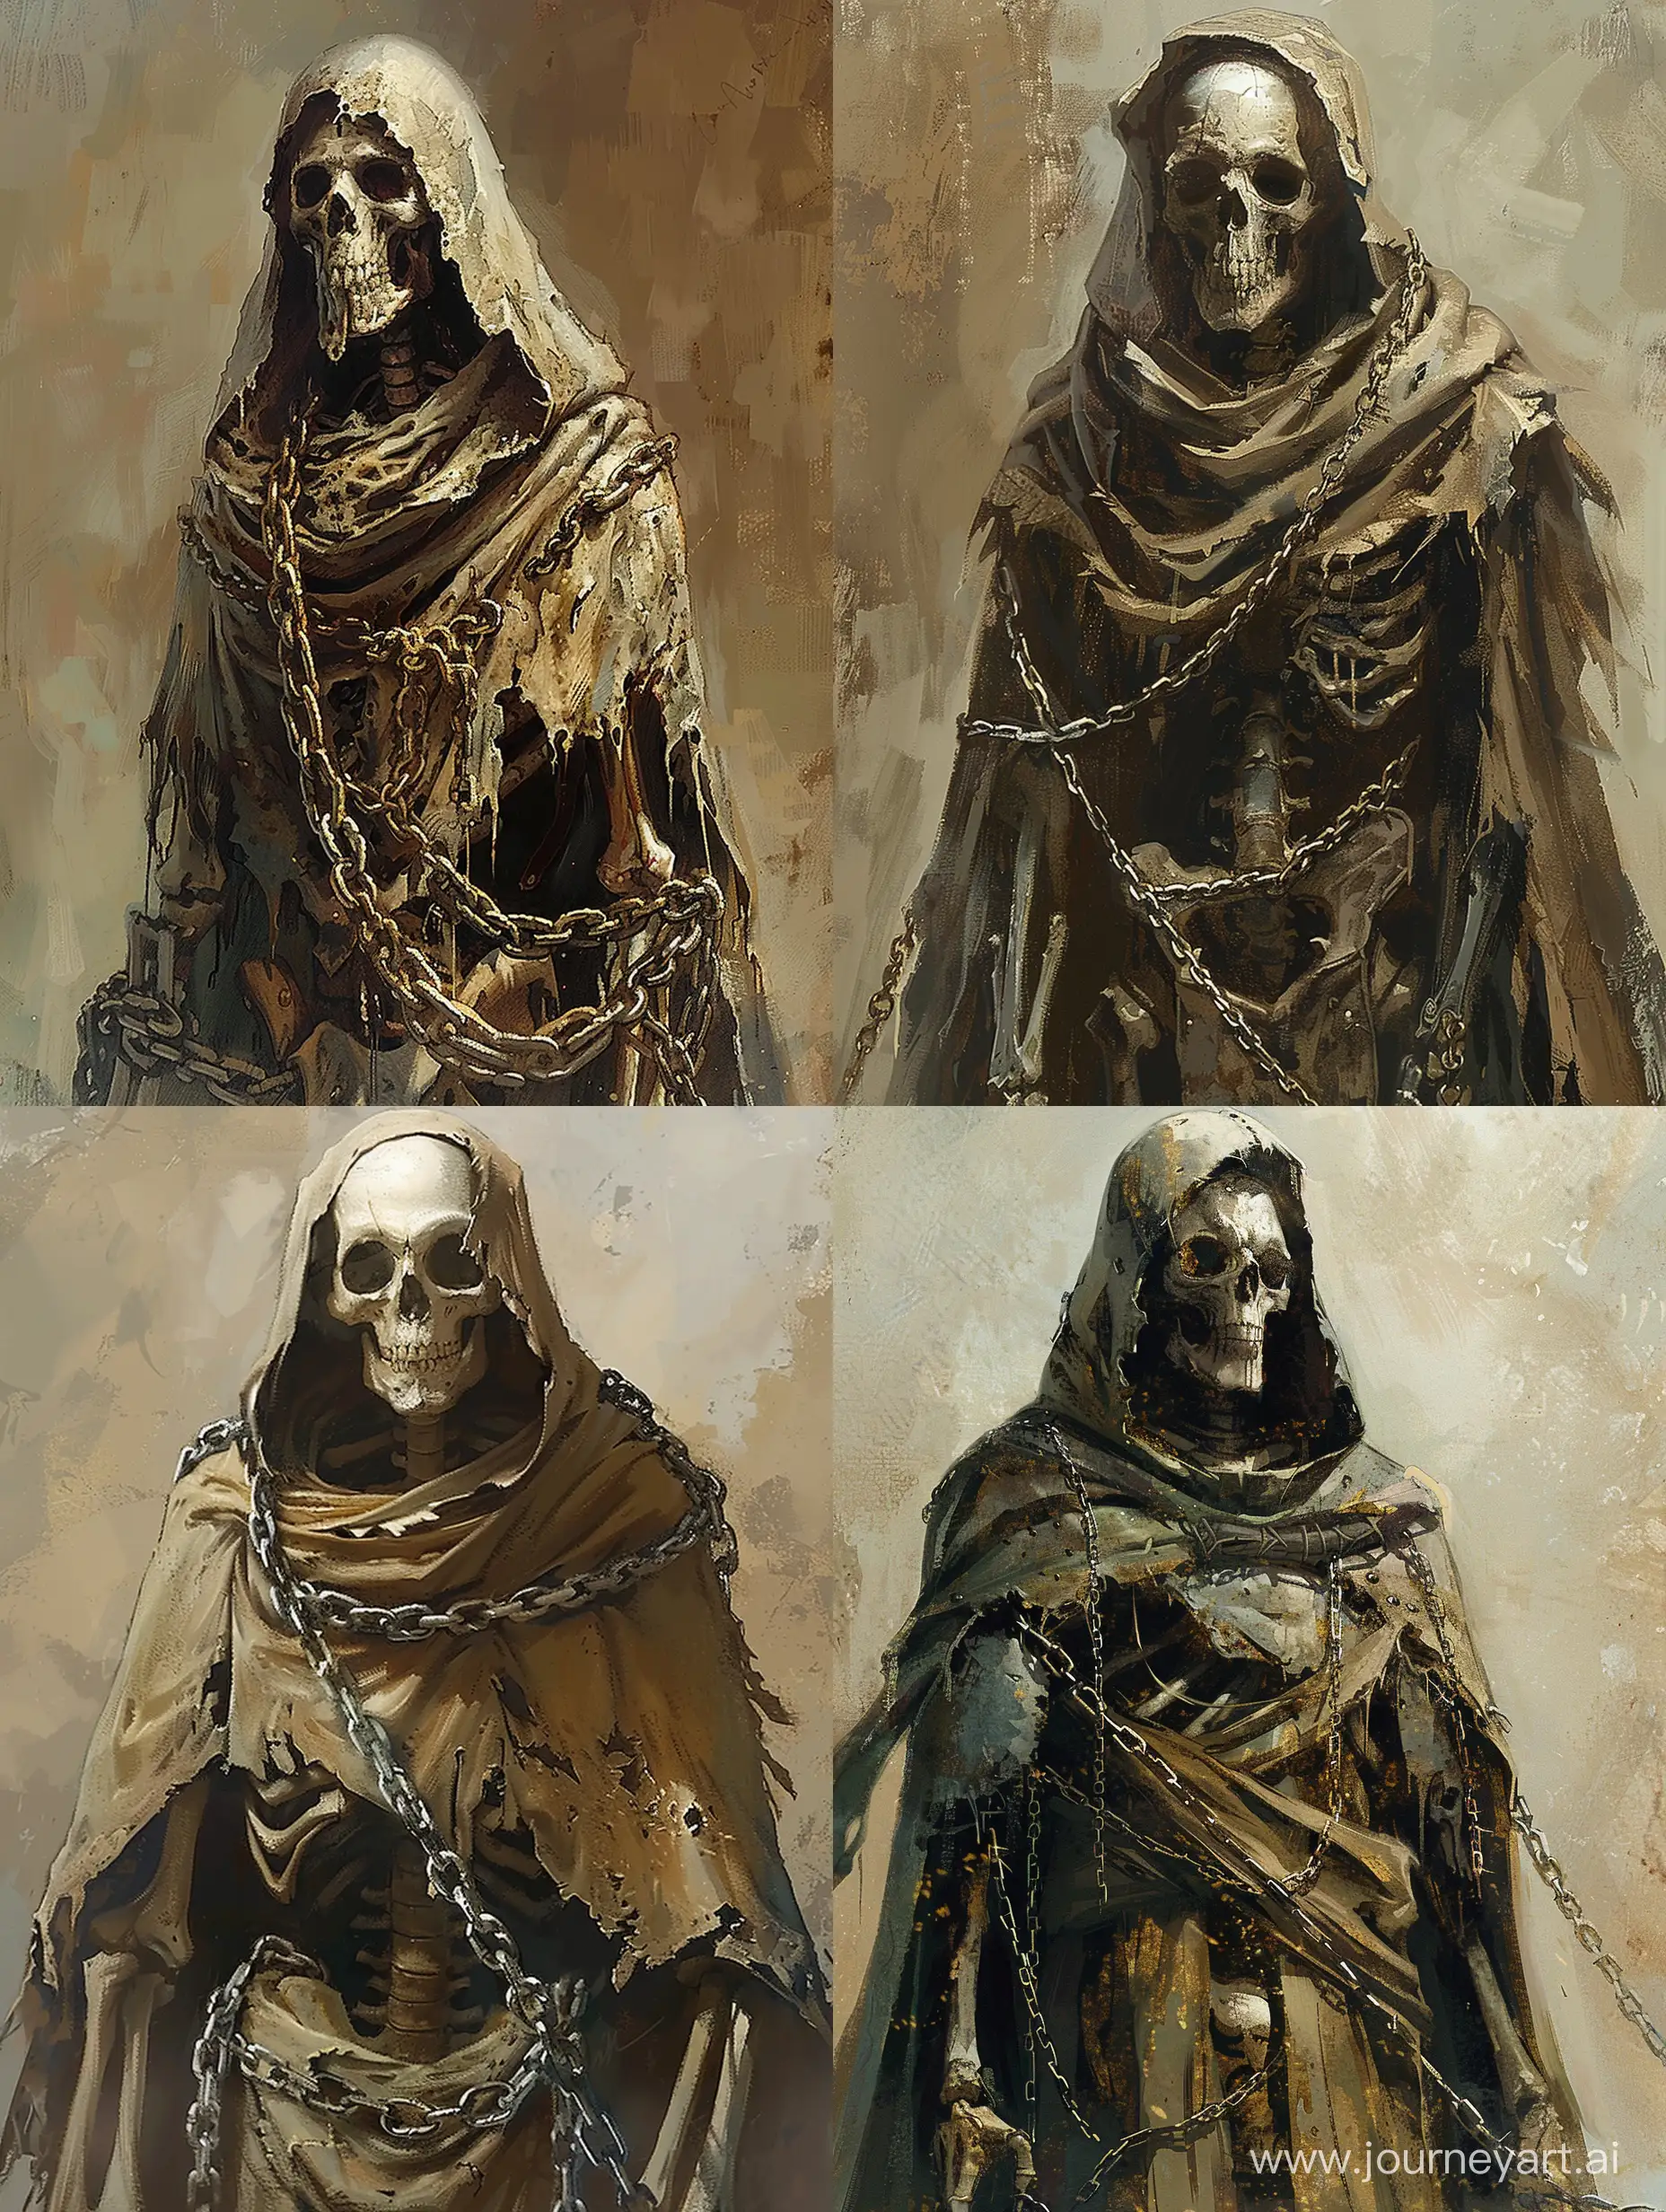 The central subject is a skeletal being draped in tattered robes and armor. The figure wears a hooded cloak, obscuring most of its skull-like face. Only the empty eye sockets and an open mouth are visible. The robes are worn and torn, suggesting age or neglect. Chains are wrapped around its body, adding to the eerie ambiance.
The background is rendered in muted tones, enhancing the overall sense of foreboding. The figure stands against this backdrop, exuding an aura of ancient malevolence.